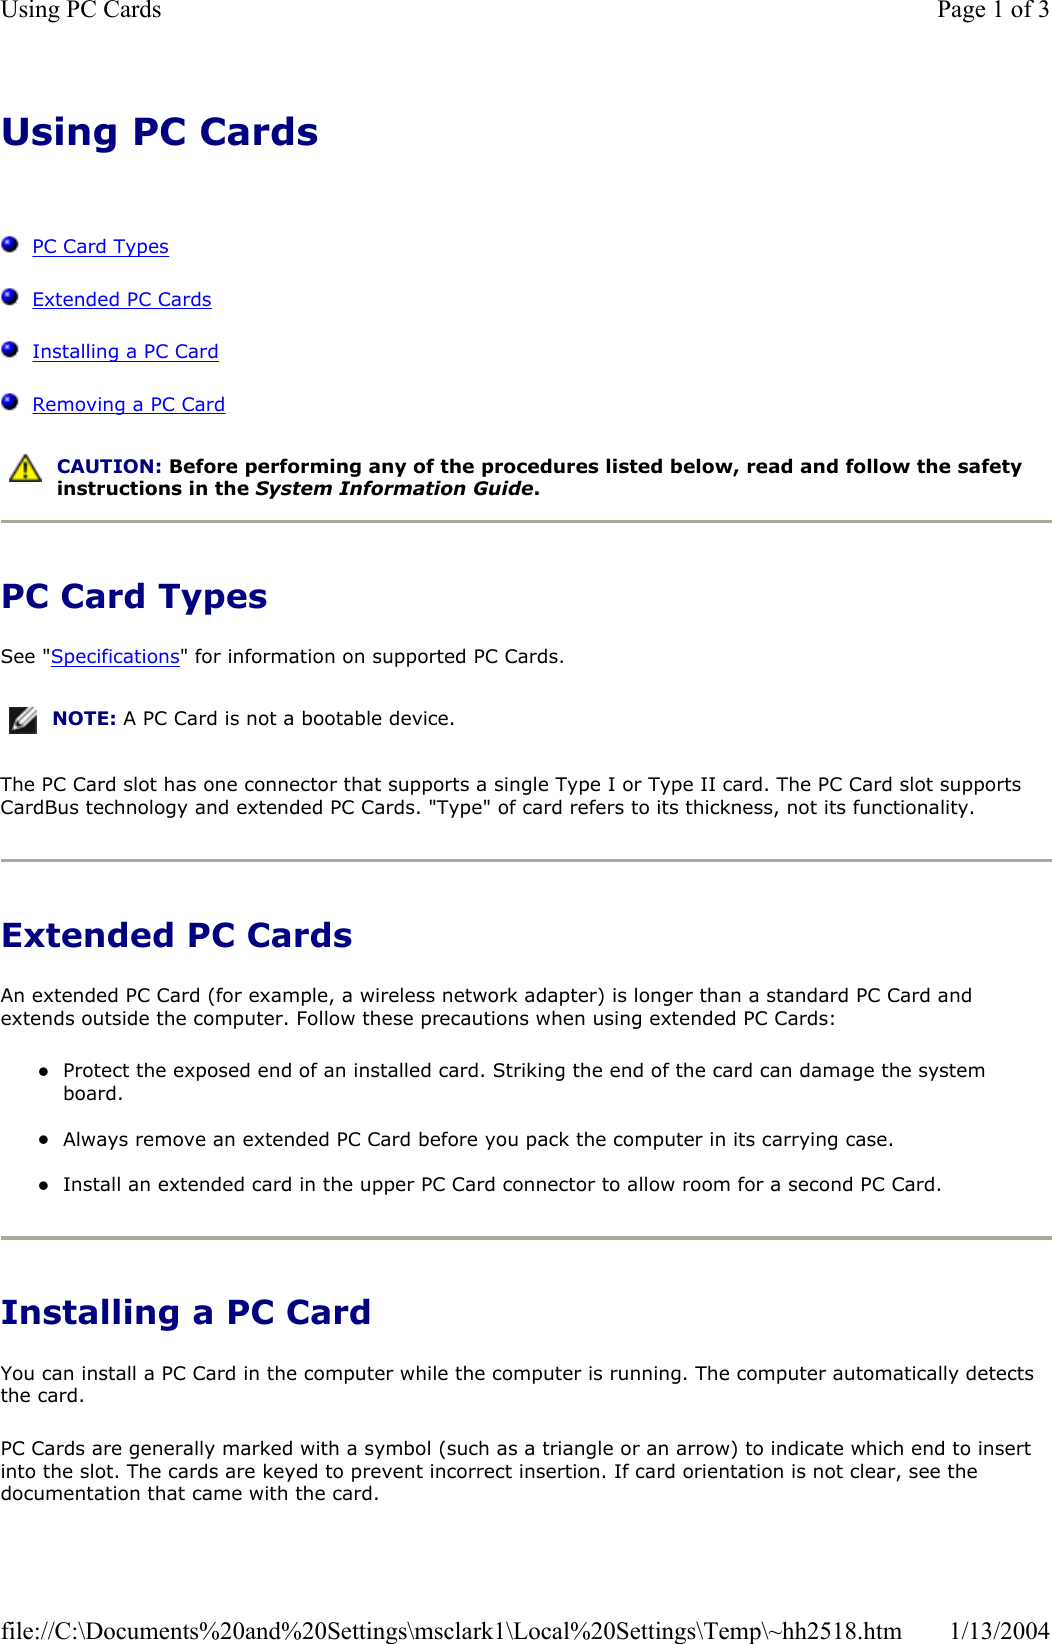 Using PC CardsPC Card TypesExtended PC CardsInstalling a PC CardRemoving a PC Card PC Card Types See &quot;Specifications&quot; for information on supported PC Cards. The PC Card slot has one connector that supports a single Type I or Type II card. The PC Card slot supports CardBus technology and extended PC Cards. &quot;Type&quot; of card refers to its thickness, not its functionality. Extended PC Cards An extended PC Card (for example, a wireless network adapter) is longer than a standard PC Card and extends outside the computer. Follow these precautions when using extended PC Cards: zProtect the exposed end of an installed card. Striking the end of the card can damage the system board. zAlways remove an extended PC Card before you pack the computer in its carrying case. zInstall an extended card in the upper PC Card connector to allow room for a second PC Card. Installing a PC Card You can install a PC Card in the computer while the computer is running. The computer automatically detects the card. PC Cards are generally marked with a symbol (such as a triangle or an arrow) to indicate which end to insert into the slot. The cards are keyed to prevent incorrect insertion. If card orientation is not clear, see the documentation that came with the card.  CAUTION: Before performing any of the procedures listed below, read and follow the safety instructions in the System Information Guide.NOTE: A PC Card is not a bootable device.Page 1 of 3Using PC Cards1/13/2004file://C:\Documents%20and%20Settings\msclark1\Local%20Settings\Temp\~hh2518.htm